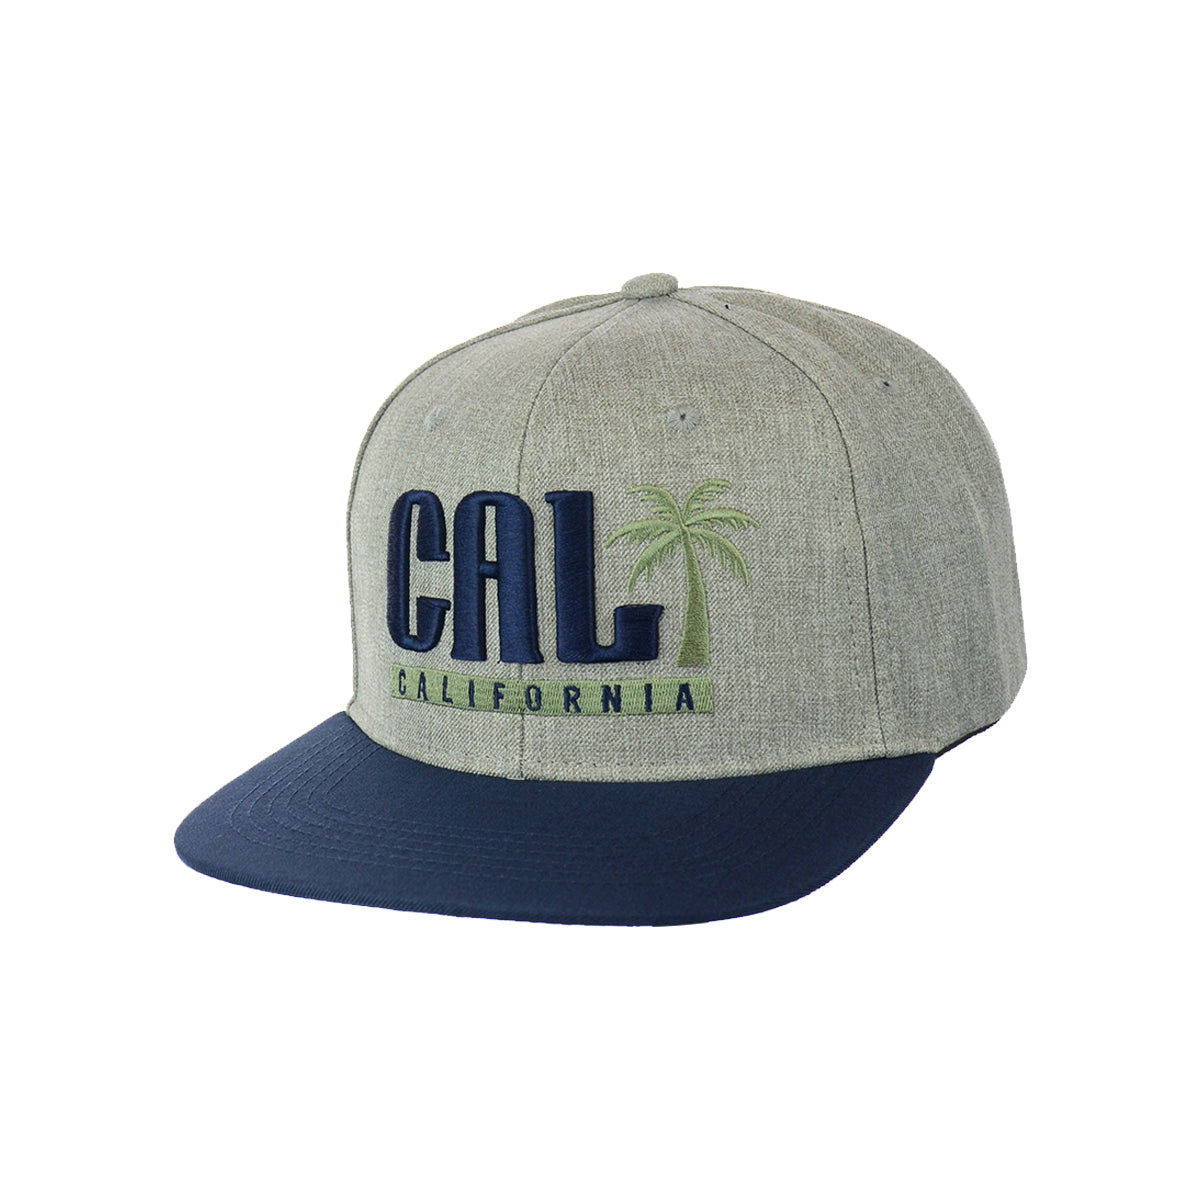 California Embroidered Snapback Hat